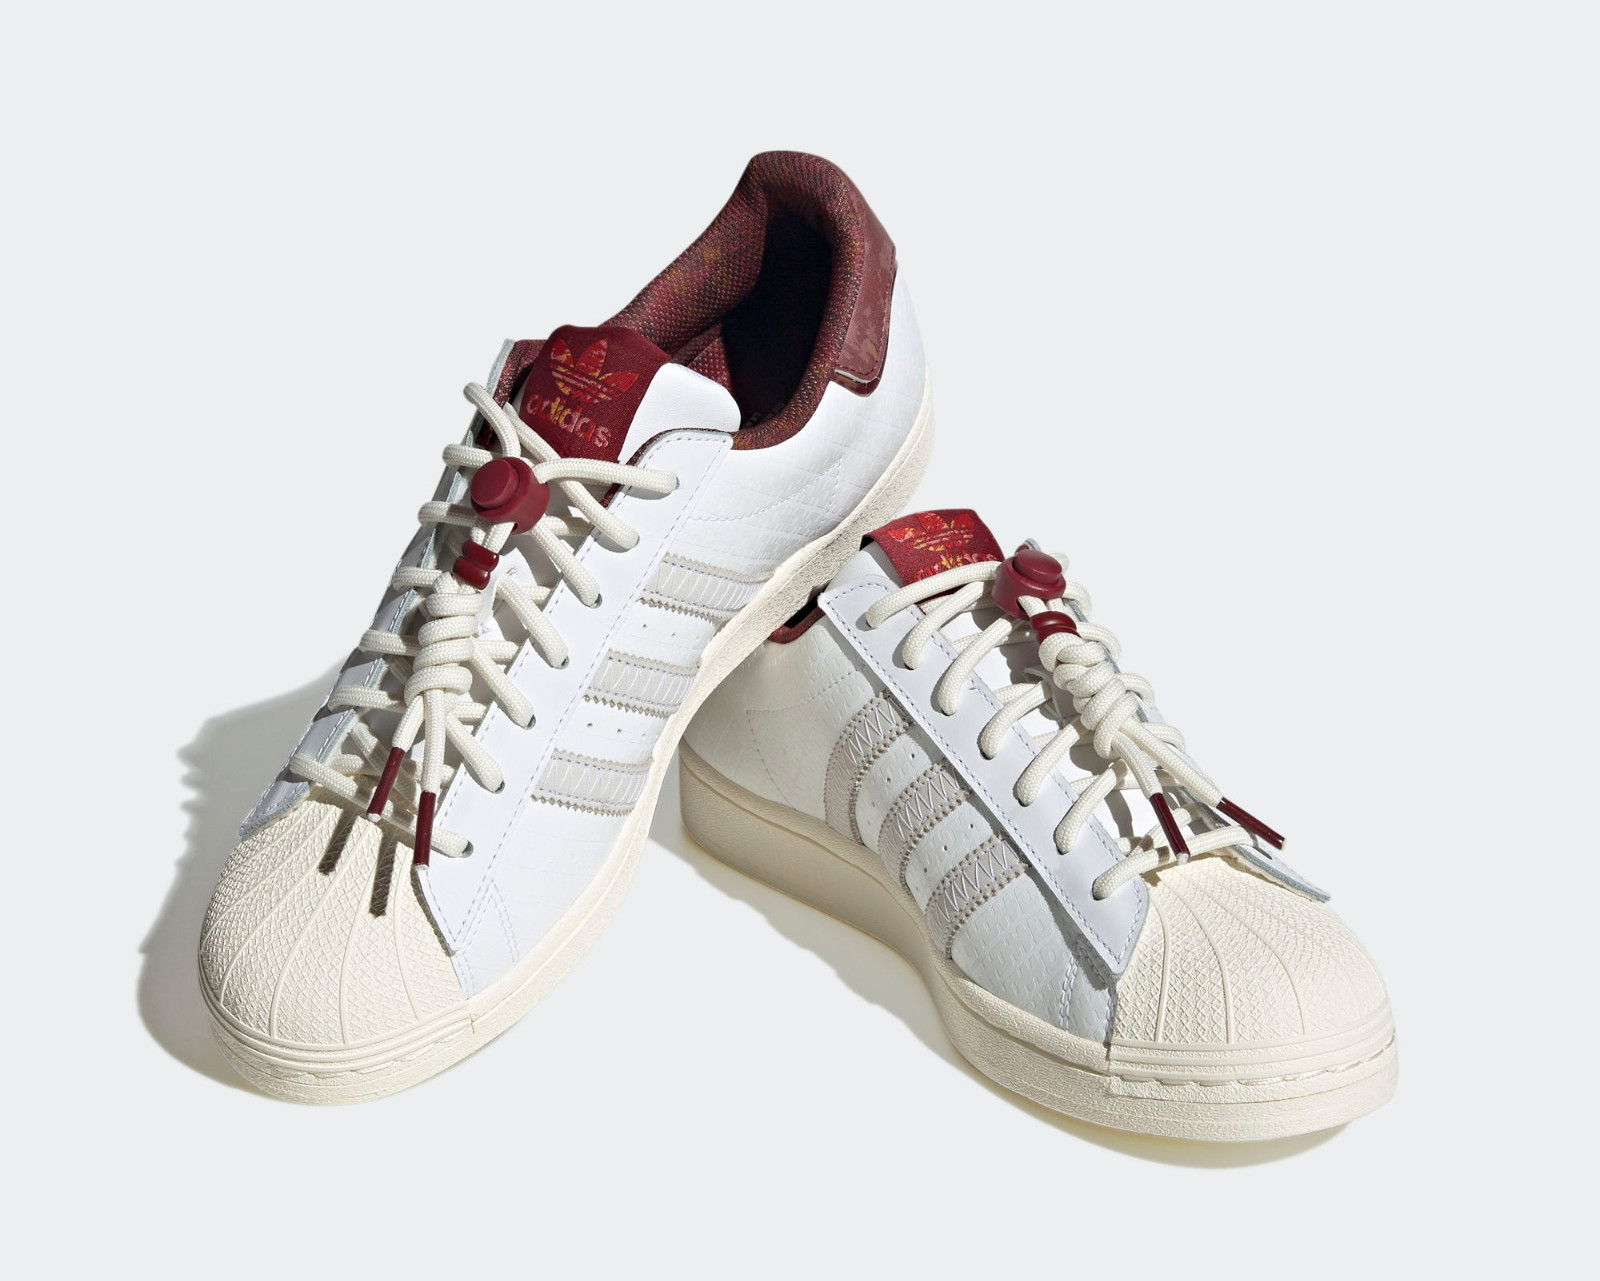 Adidas Originals Superstar Chinese New Year 2023 White Noble Maroon IF2577 Sepsale - adidas online store scam phone number search